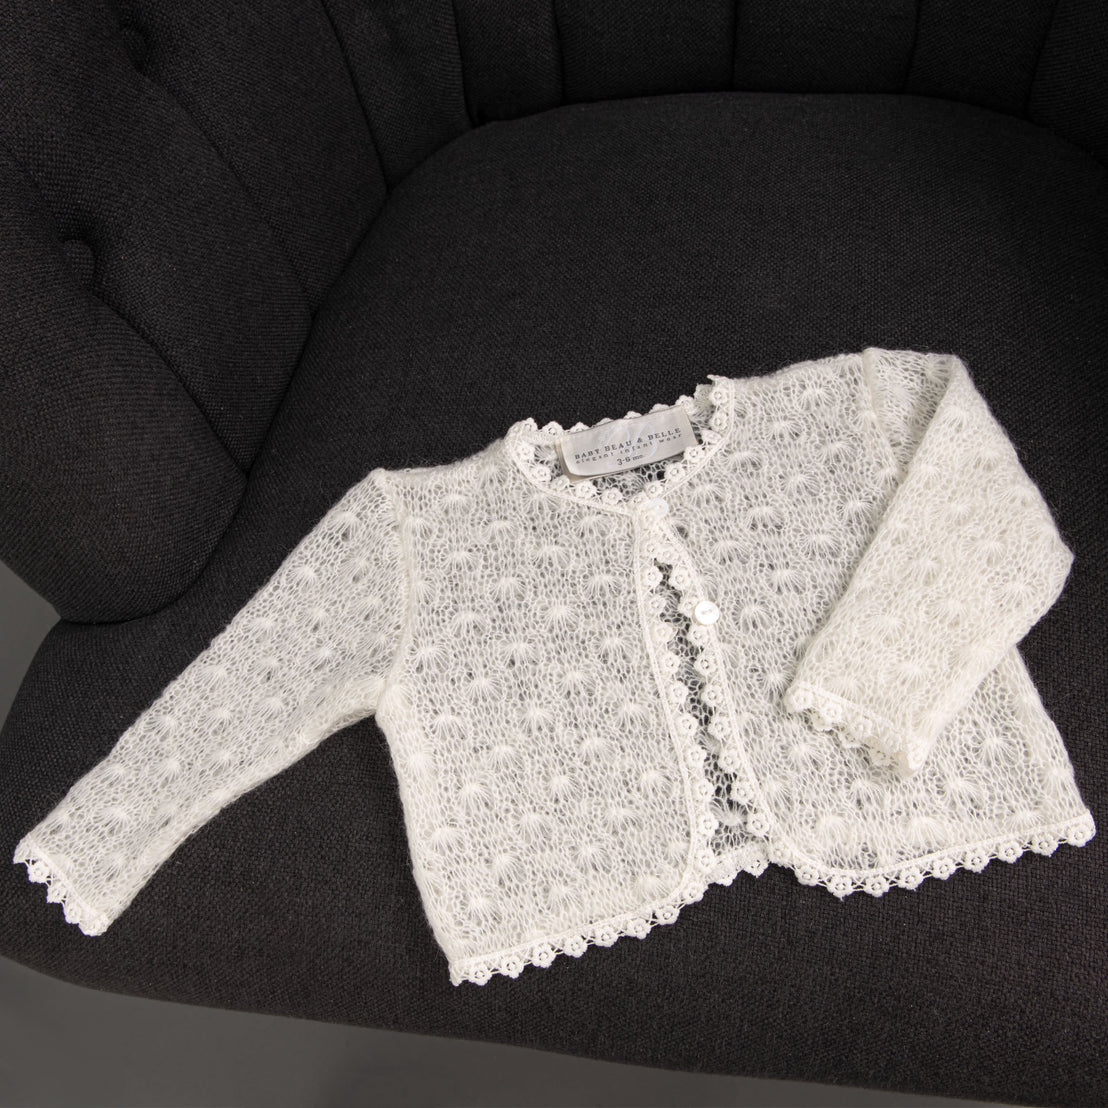 A delicate, hand-knit Grace Knit Sweater is neatly laid out on a dark gray, tufted chair. The sweater features intricate cotton lace patterns and a petite button closure.